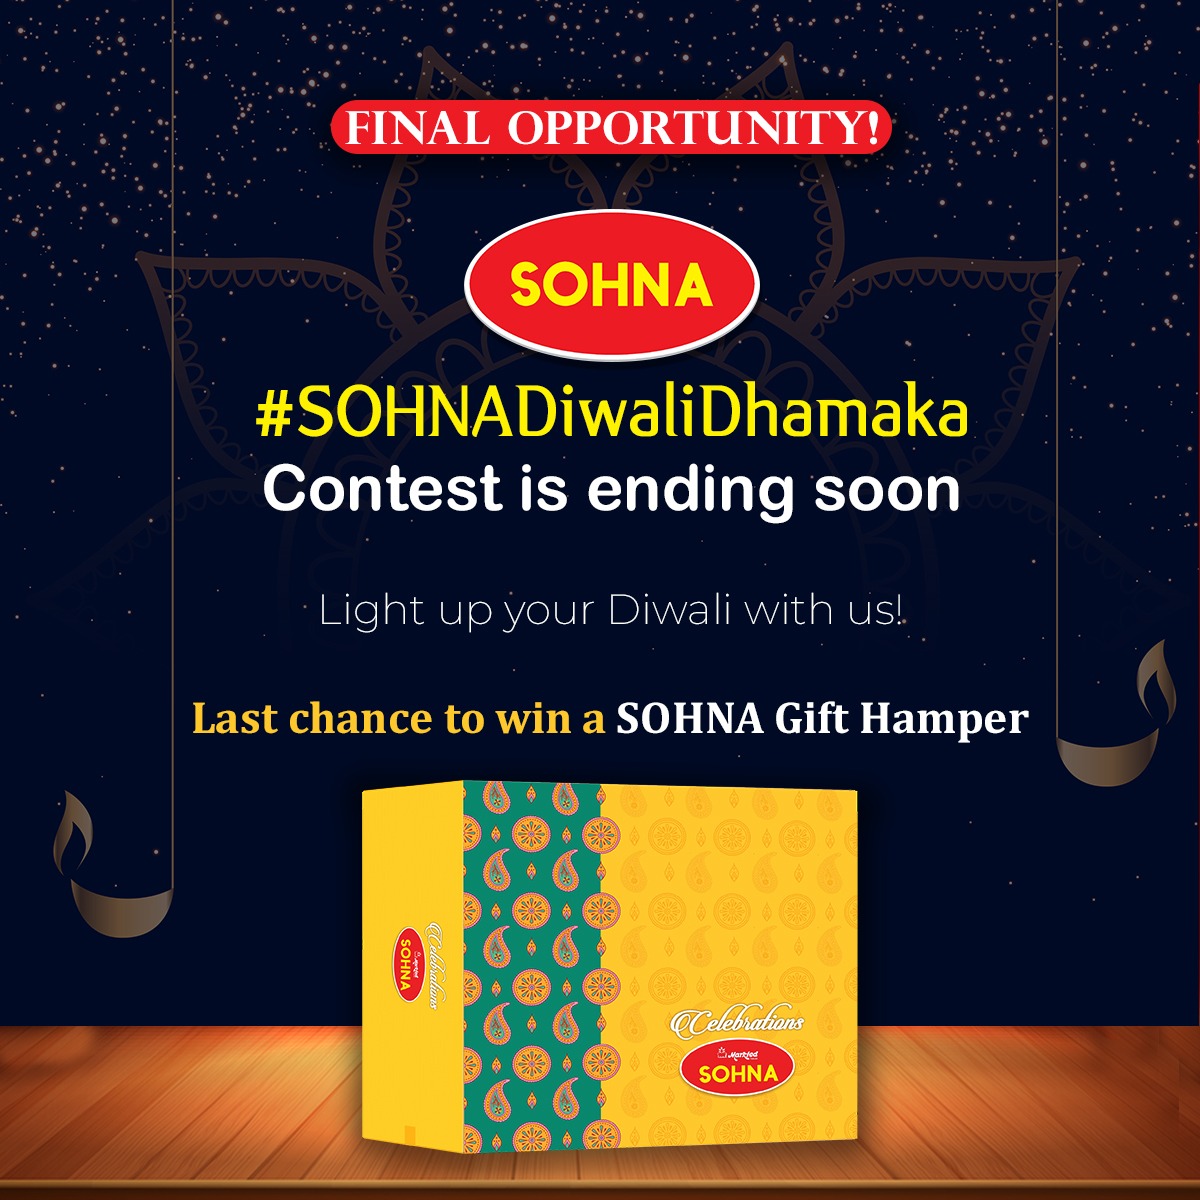 Hurry, it's your final opportunity to shine in the #SOHNADiwaliDhamaka Contest.

Don't delay, join in today and grab your chance to win SOHNA Gift Hamper! 📷📷

#sohnamarkfed #markfed #punjab #markfedpunjab #diwalidhamaka #sohnadiwalidhamaka #gifthampers #gifthamper #diwalihamper